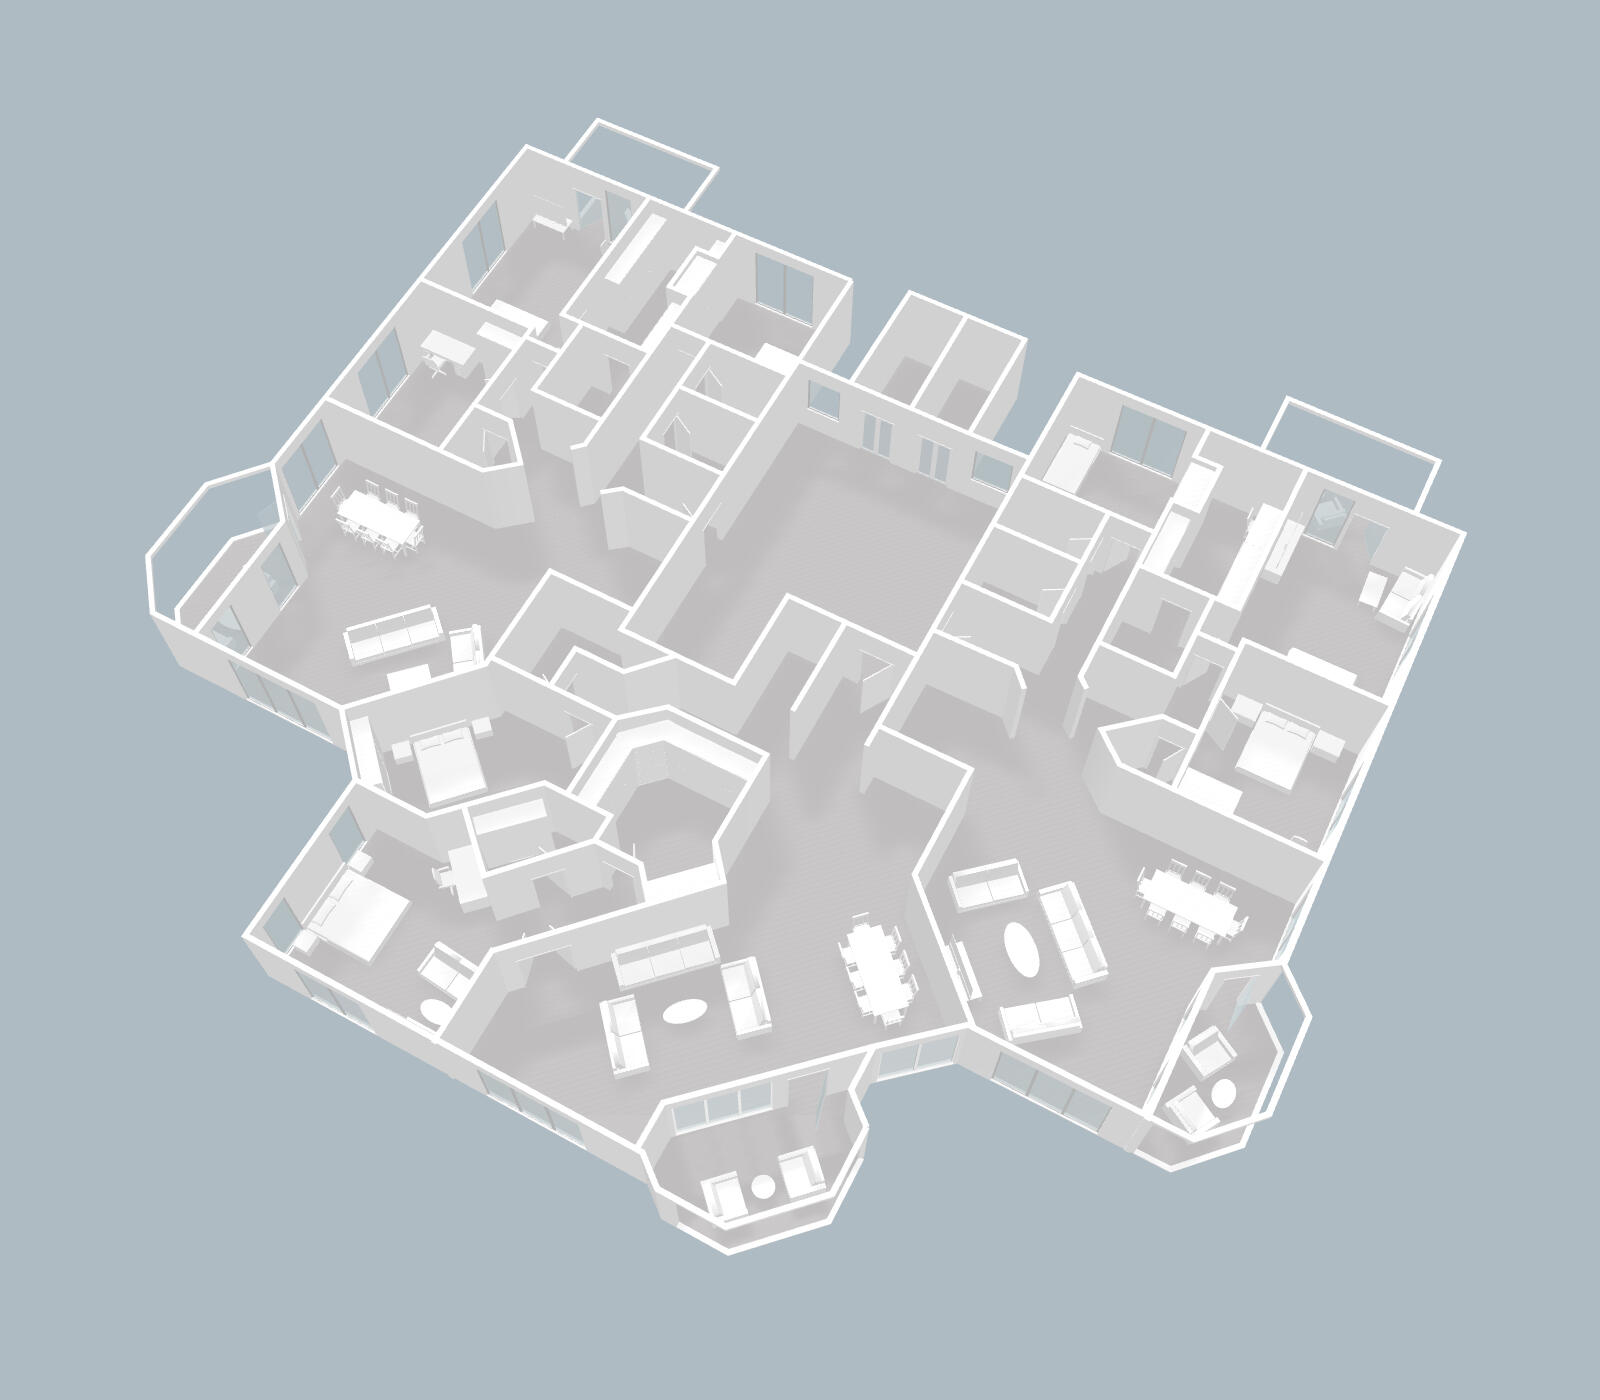 3D floor plan created with Smplrspace